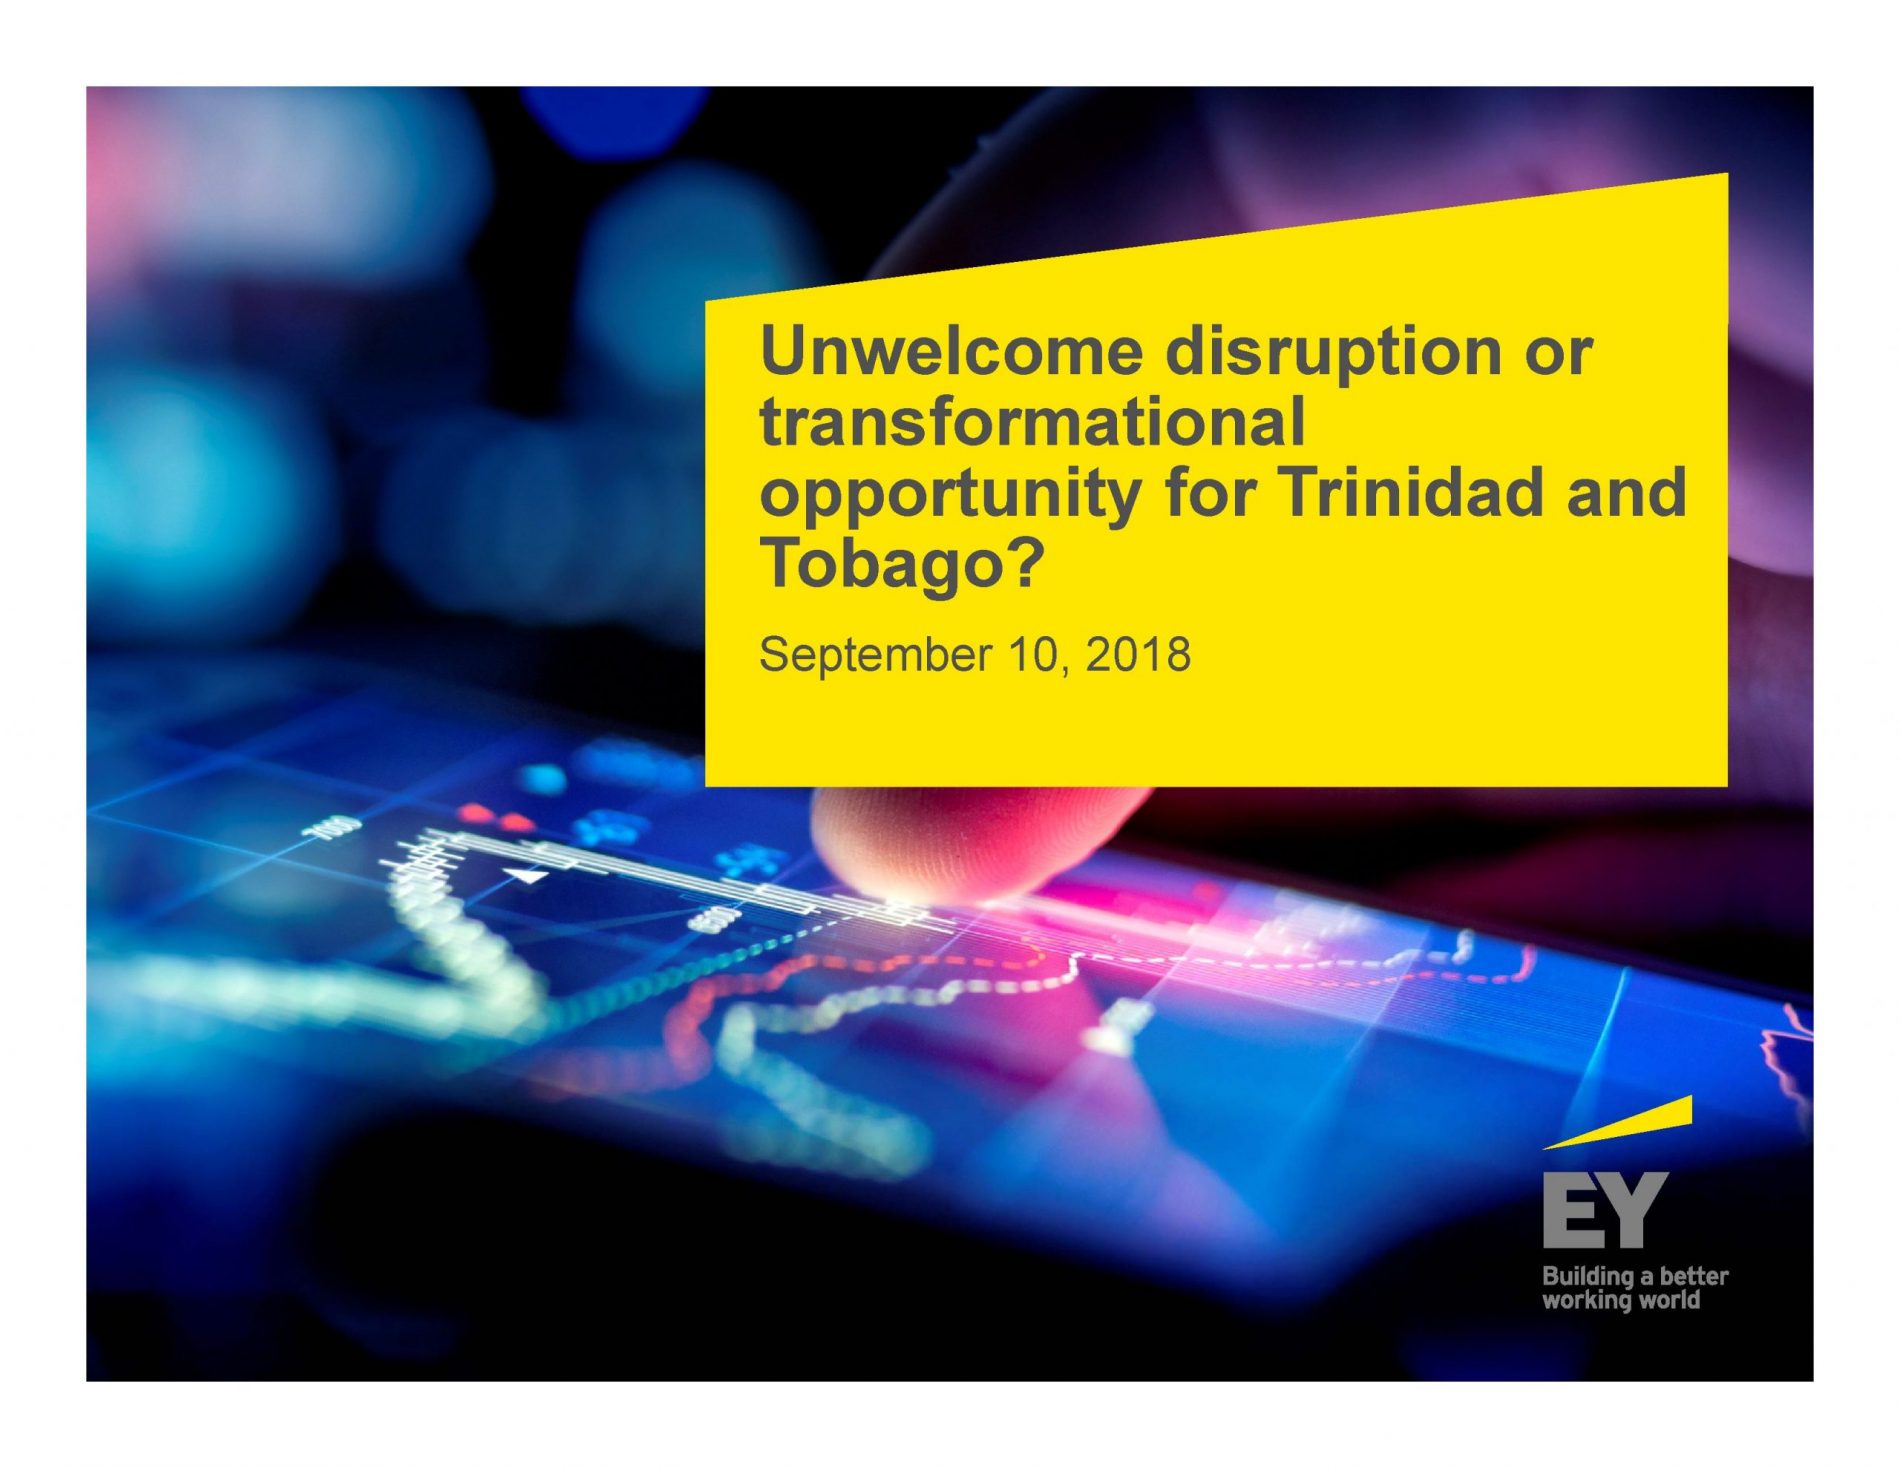 Unwelcome disruption or transformational opportunity for Trinidad and Tobago?